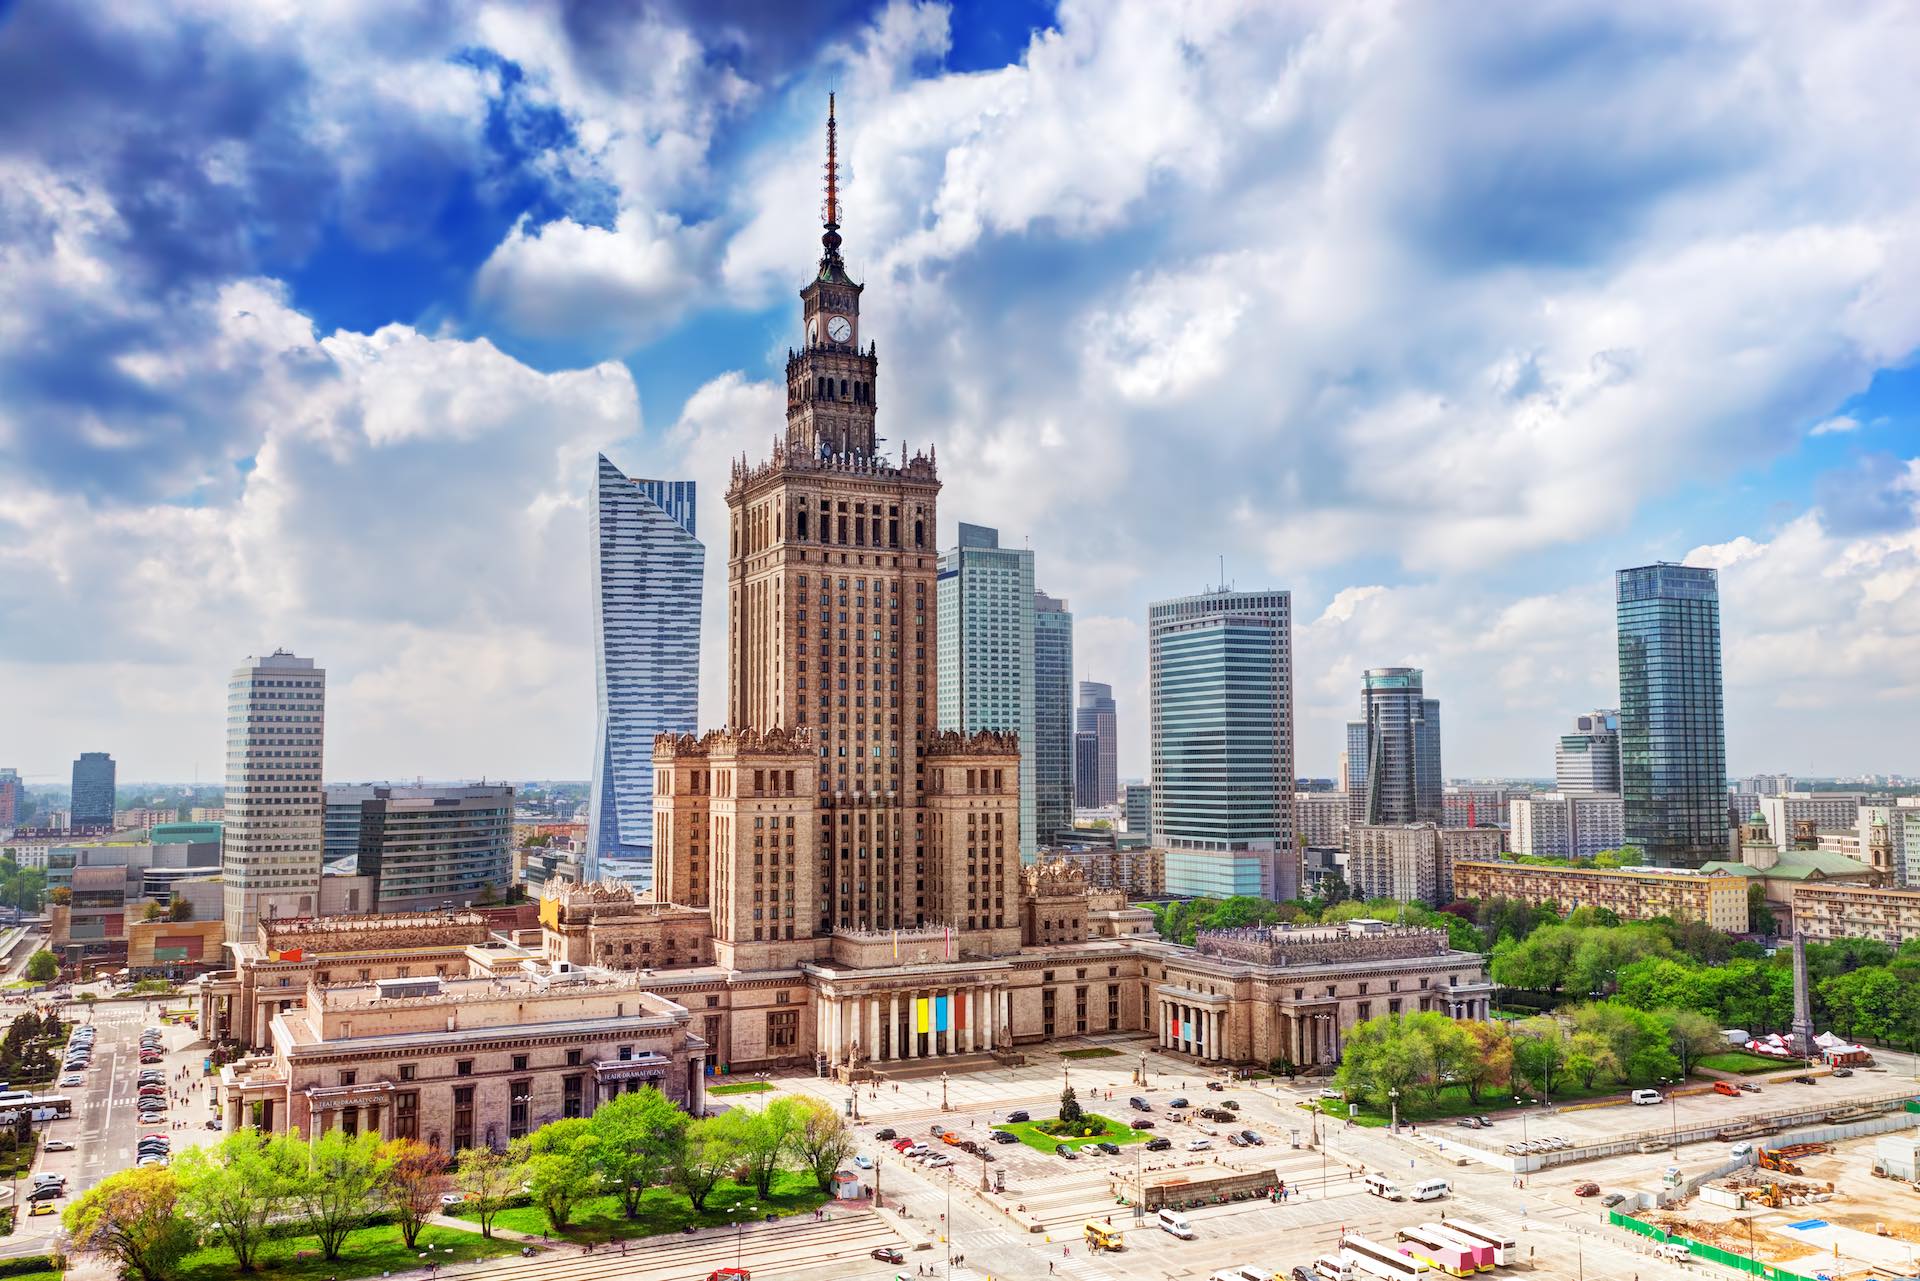 Warsaw: the fuel of economic growth in Poland